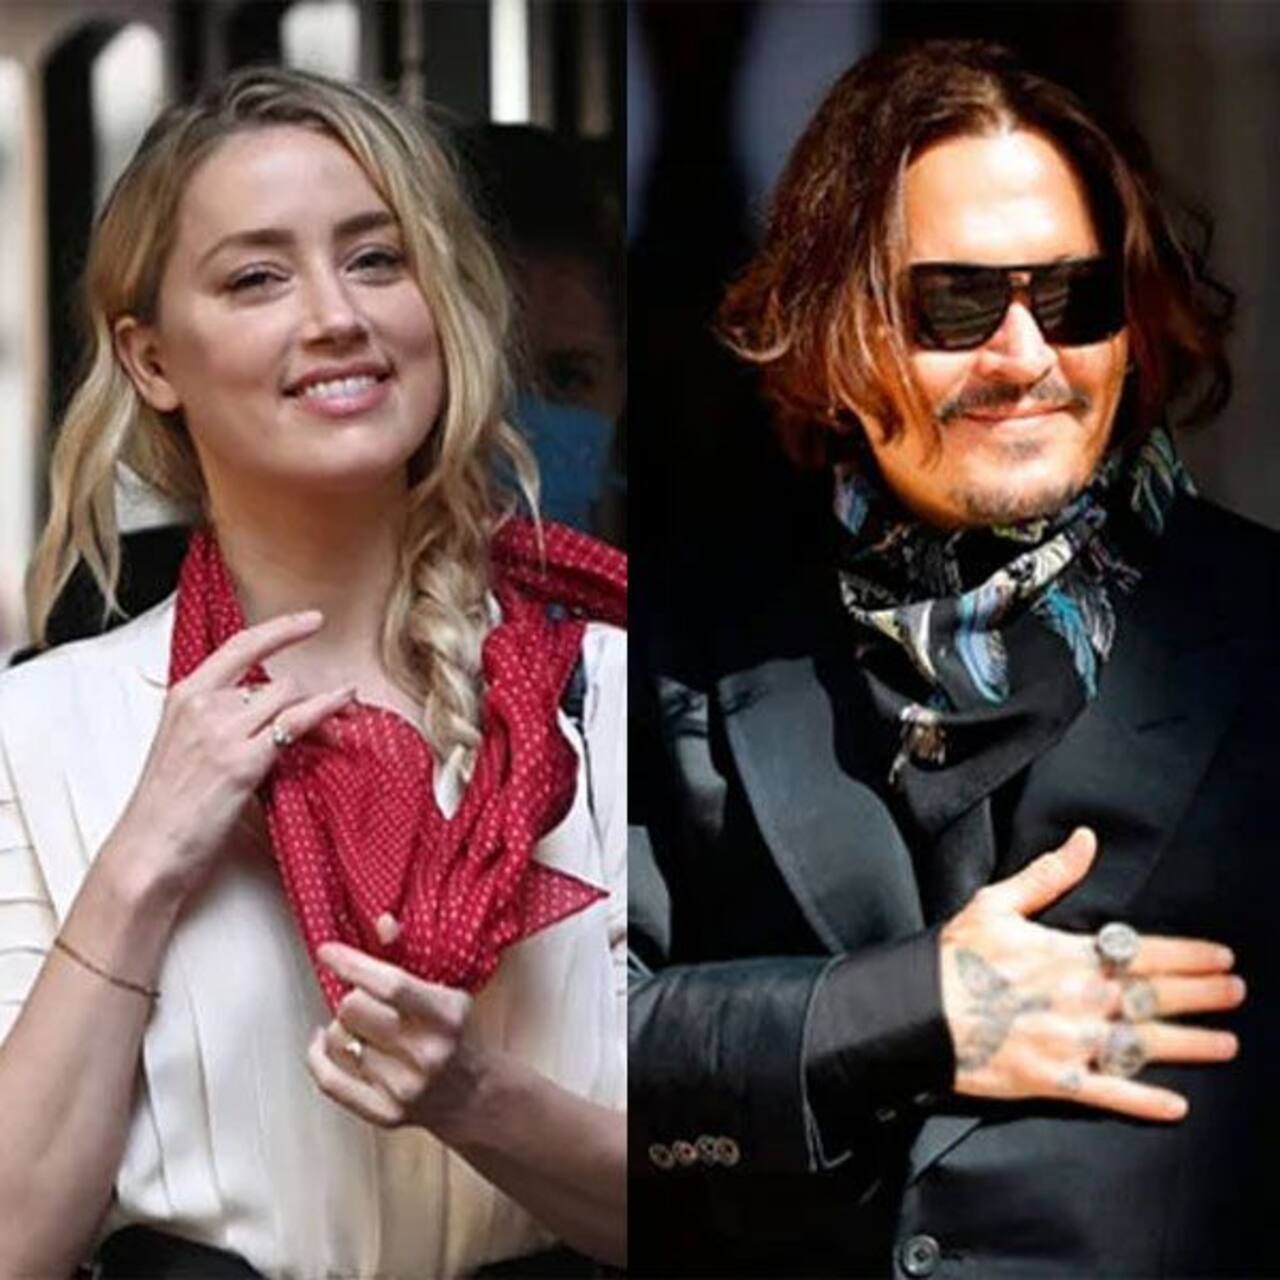 Johnny Depp’s stand over Amber Heard’s allegations